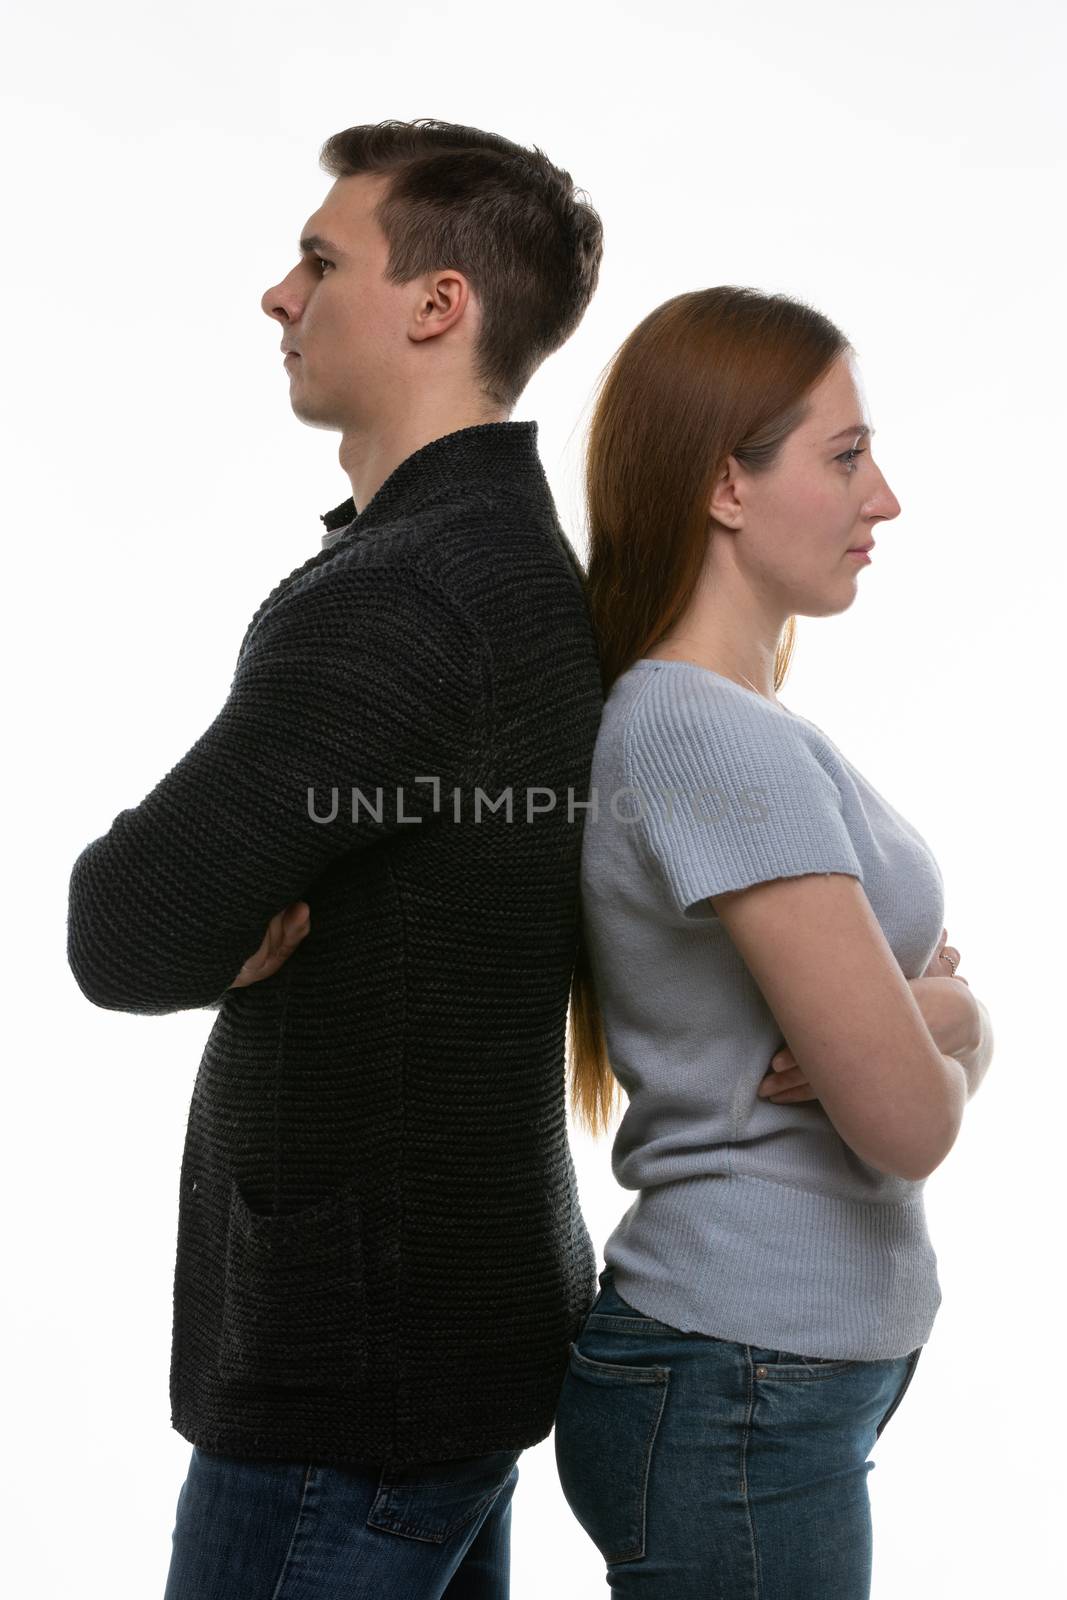 A man and a woman stand with their backs to each other, with their arms folded on their chests